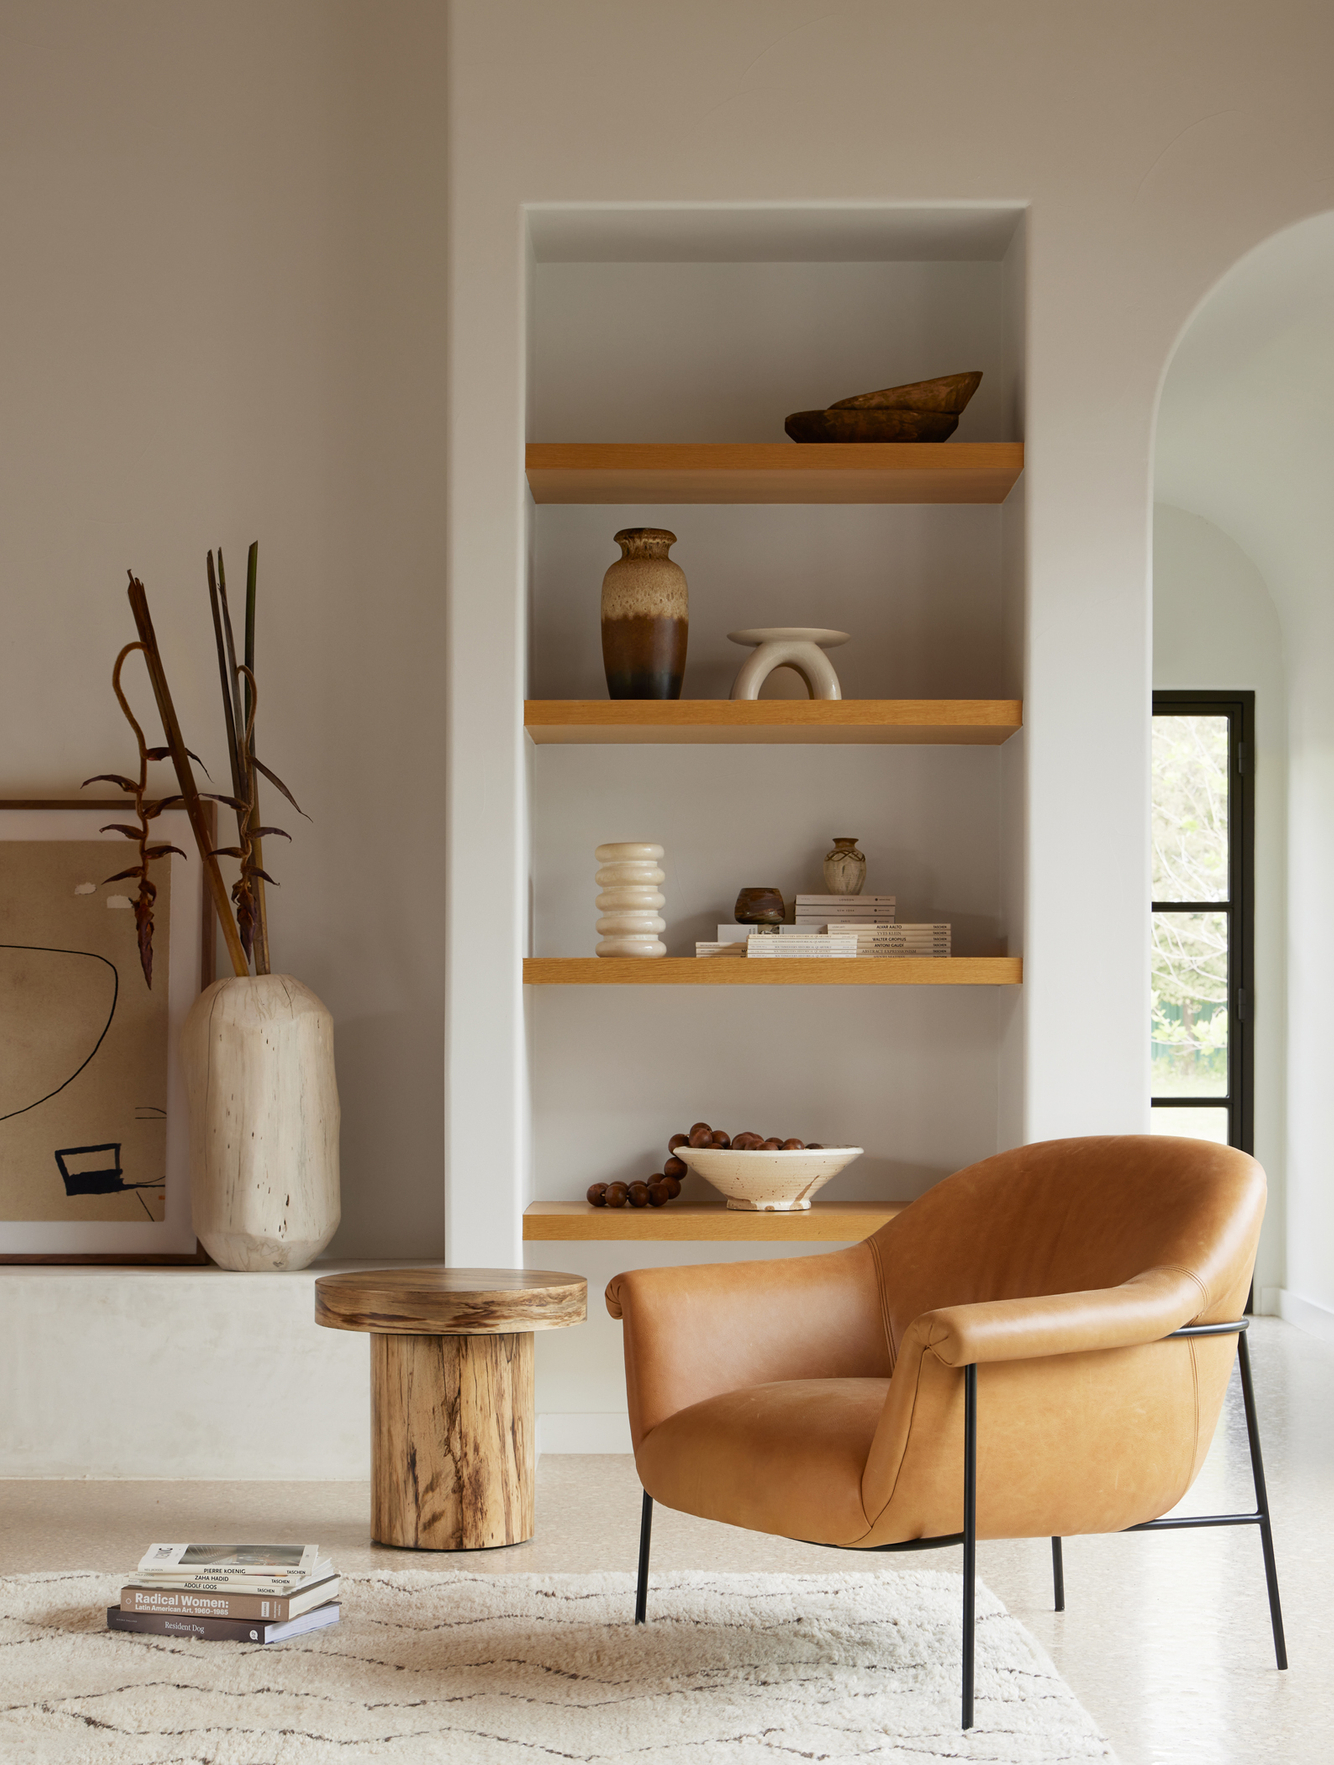 Brown leather chair in front of built in bookshelf with solid wood shelves on a cream wall